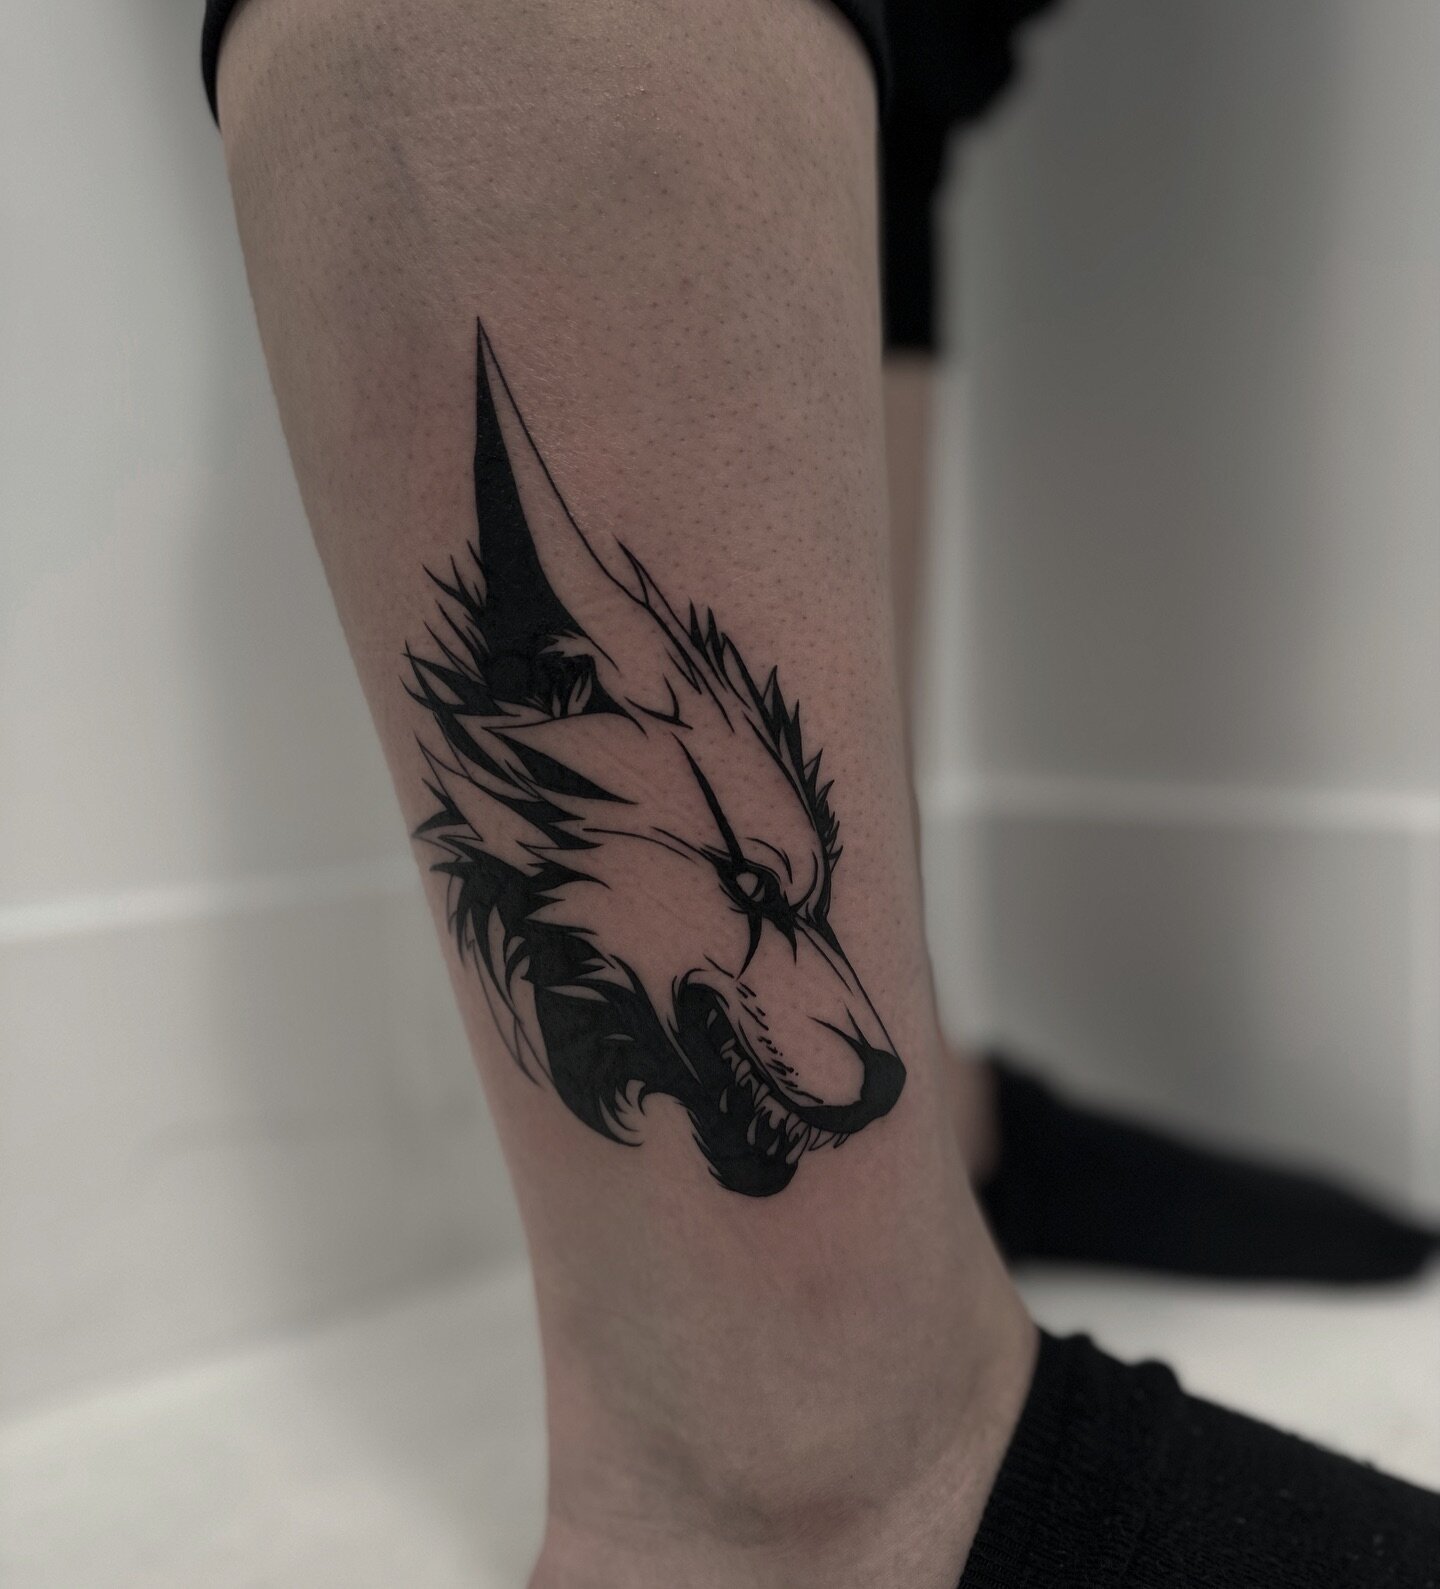 Wolf from my flash on Hannah from today 🖤 thanks dude! 🖤